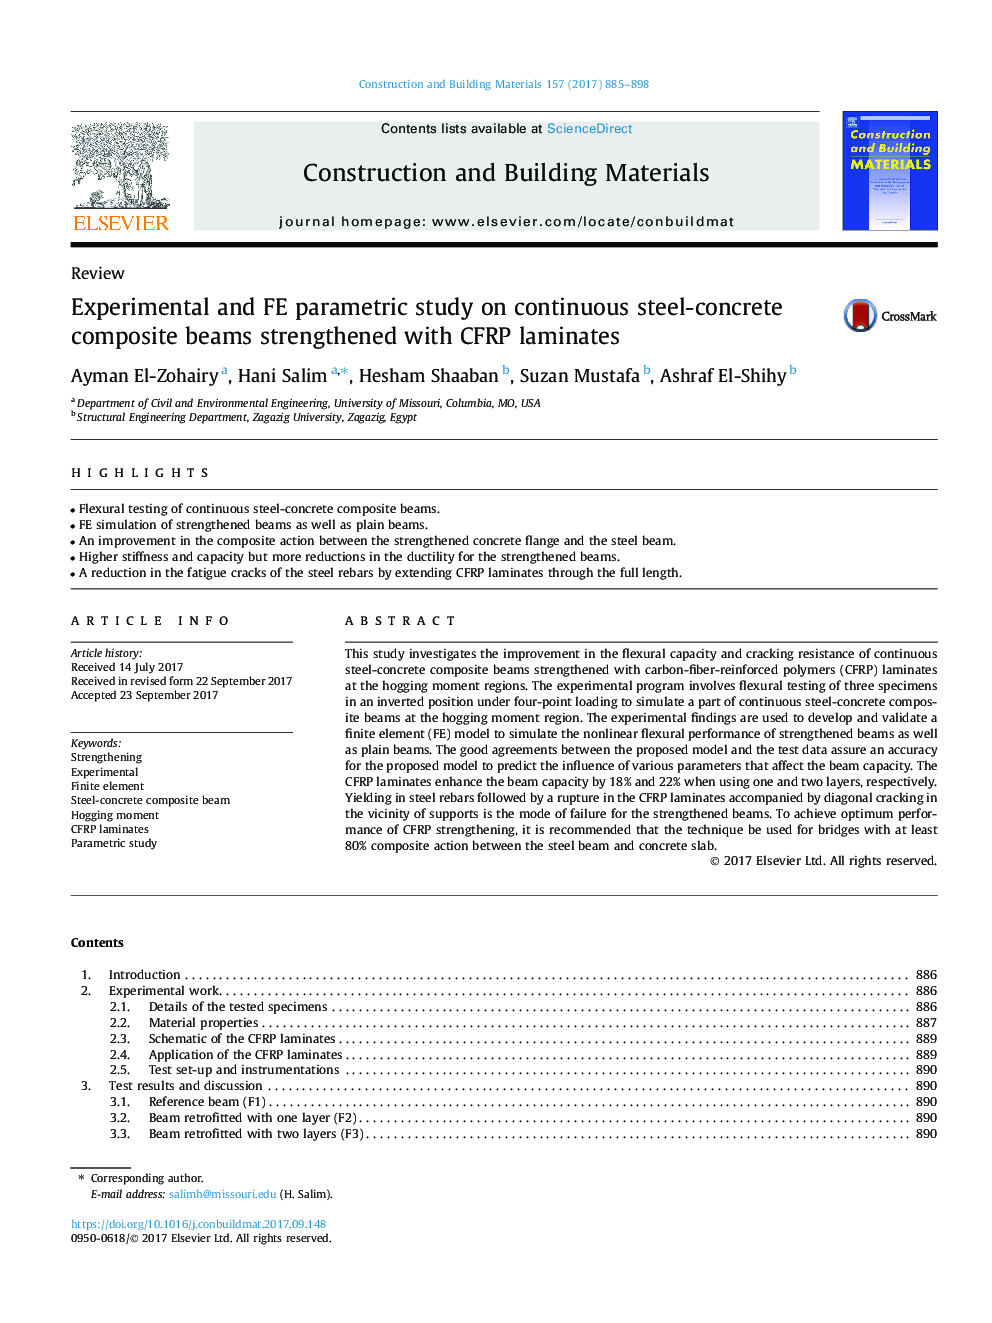 Experimental and FE parametric study on continuous steel-concrete composite beams strengthened with CFRP laminates